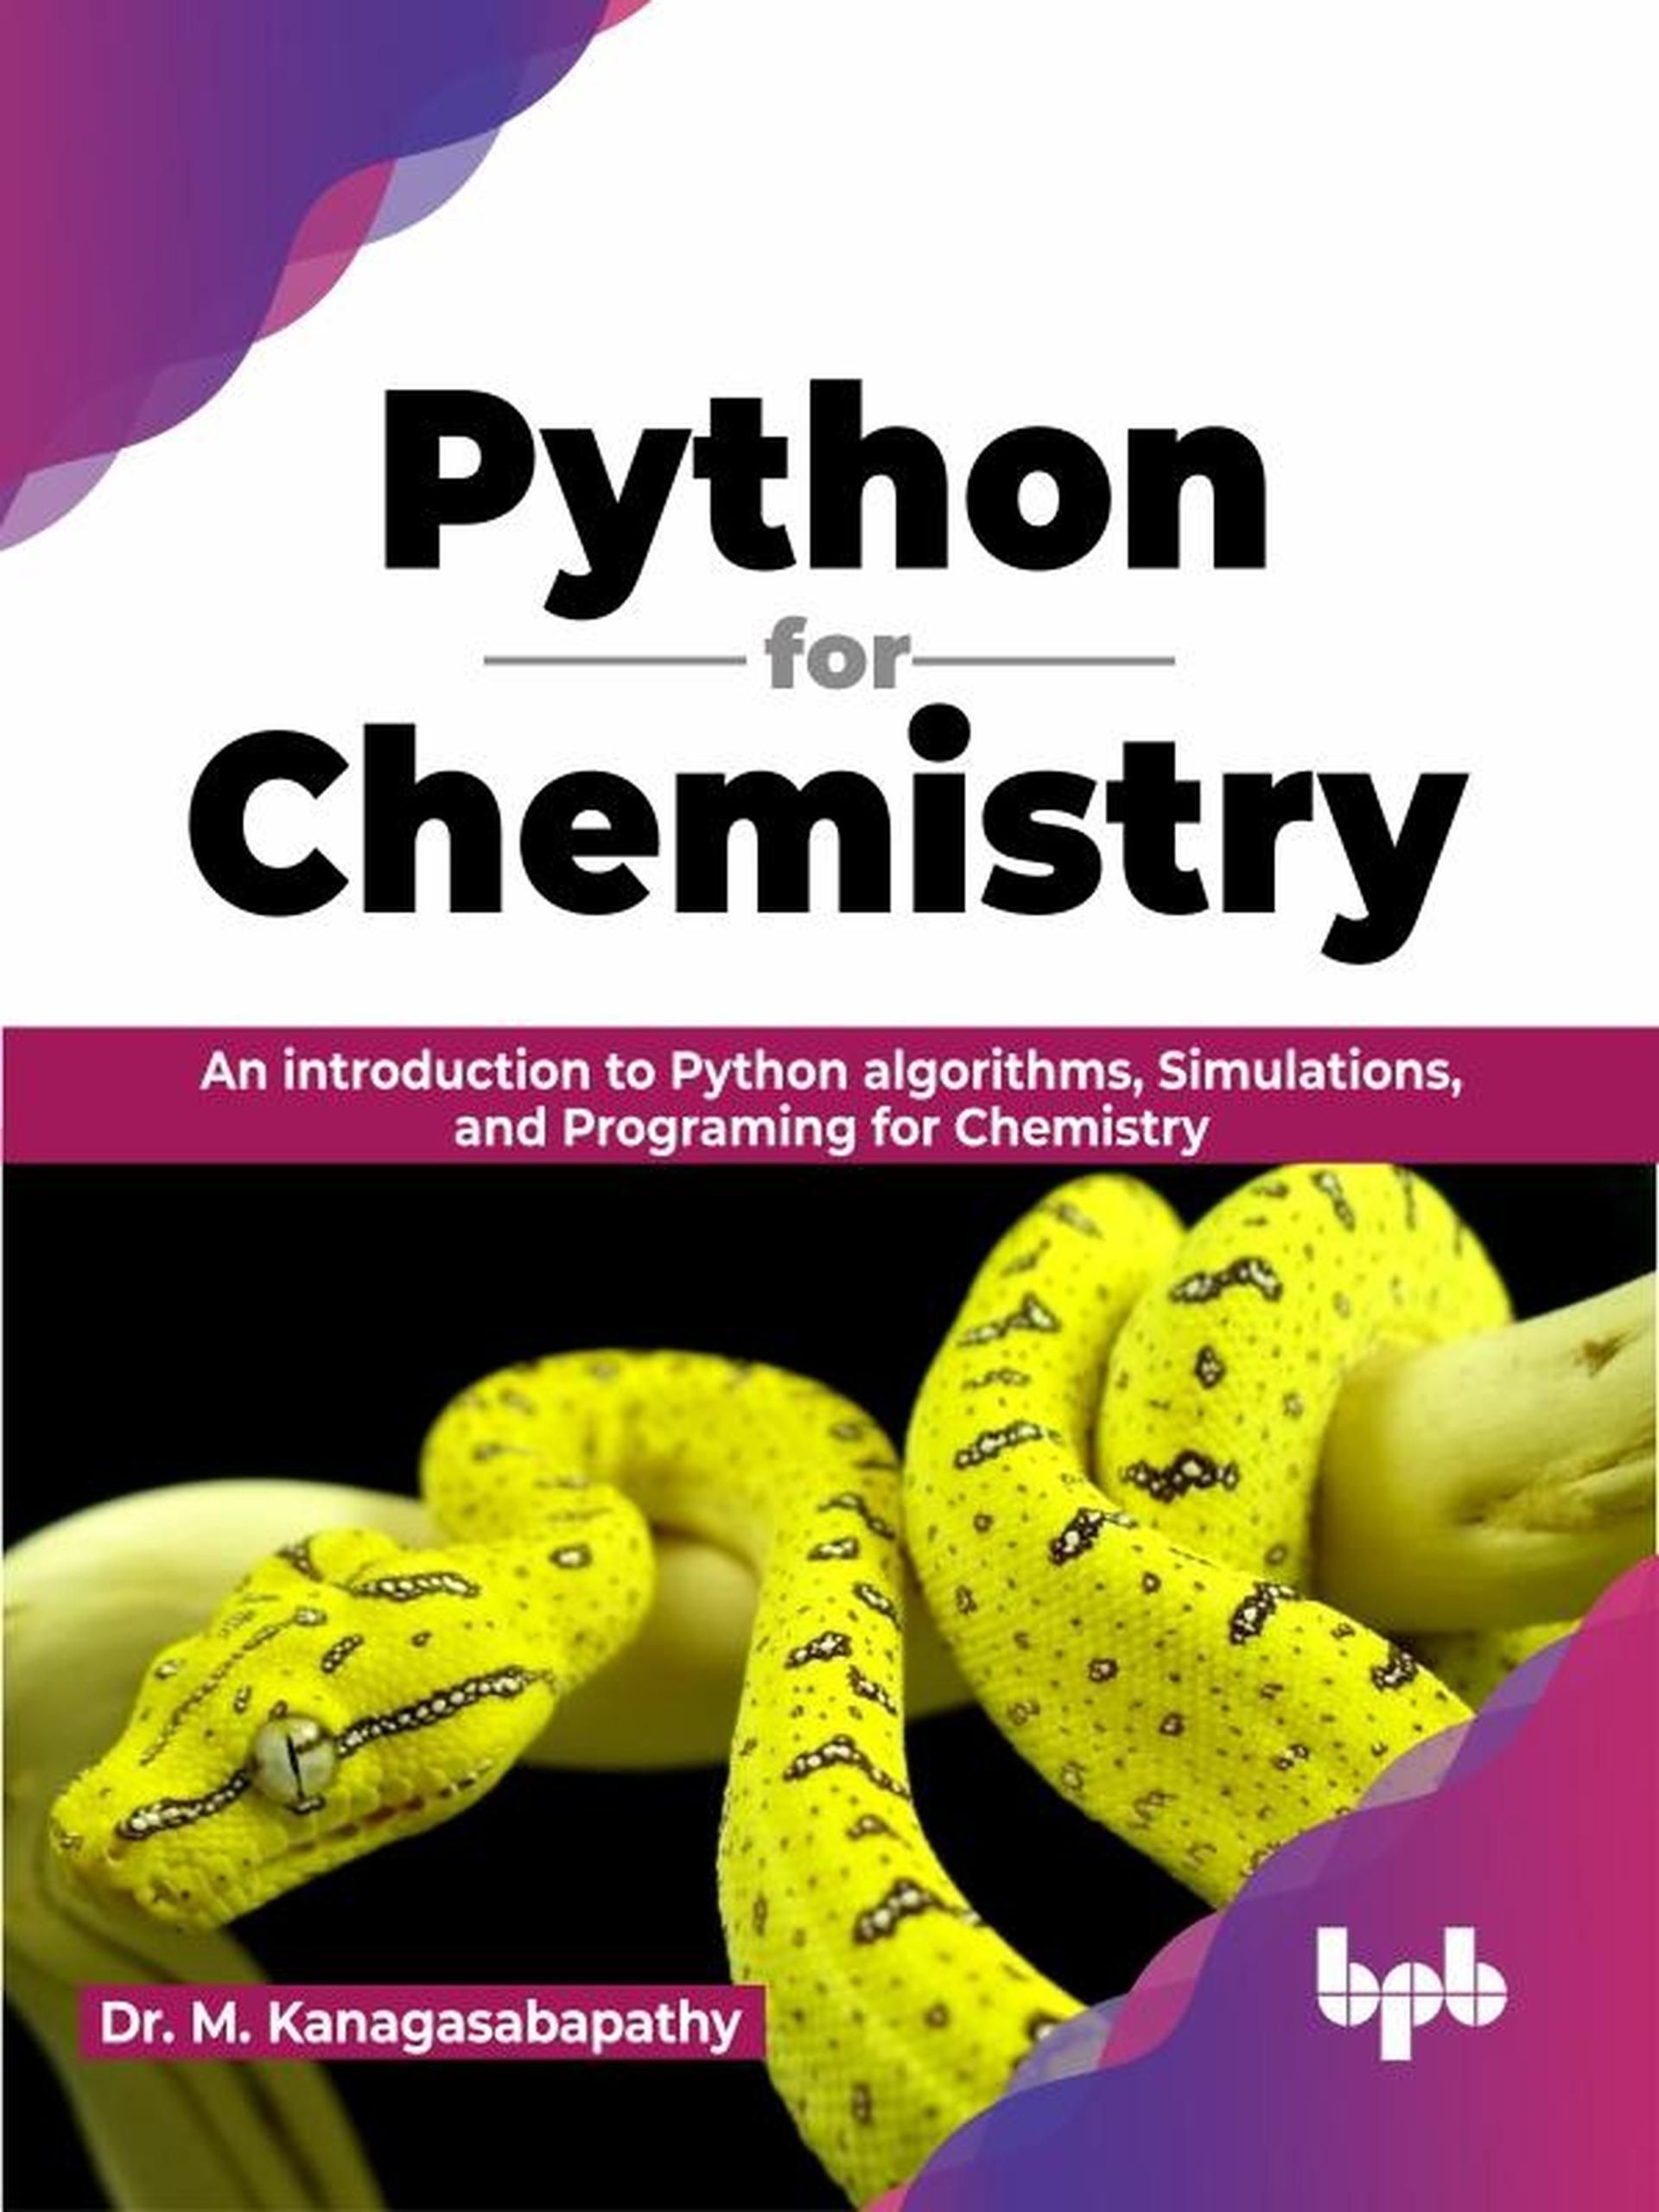 Chemistry:　to　Kanagasabapathy　v.　Chemistry　and　for　for　M.　Programing　Introduction　eBook　Python　An　Edition　Simulations,　English　Algorithms,　Python　Weltbild